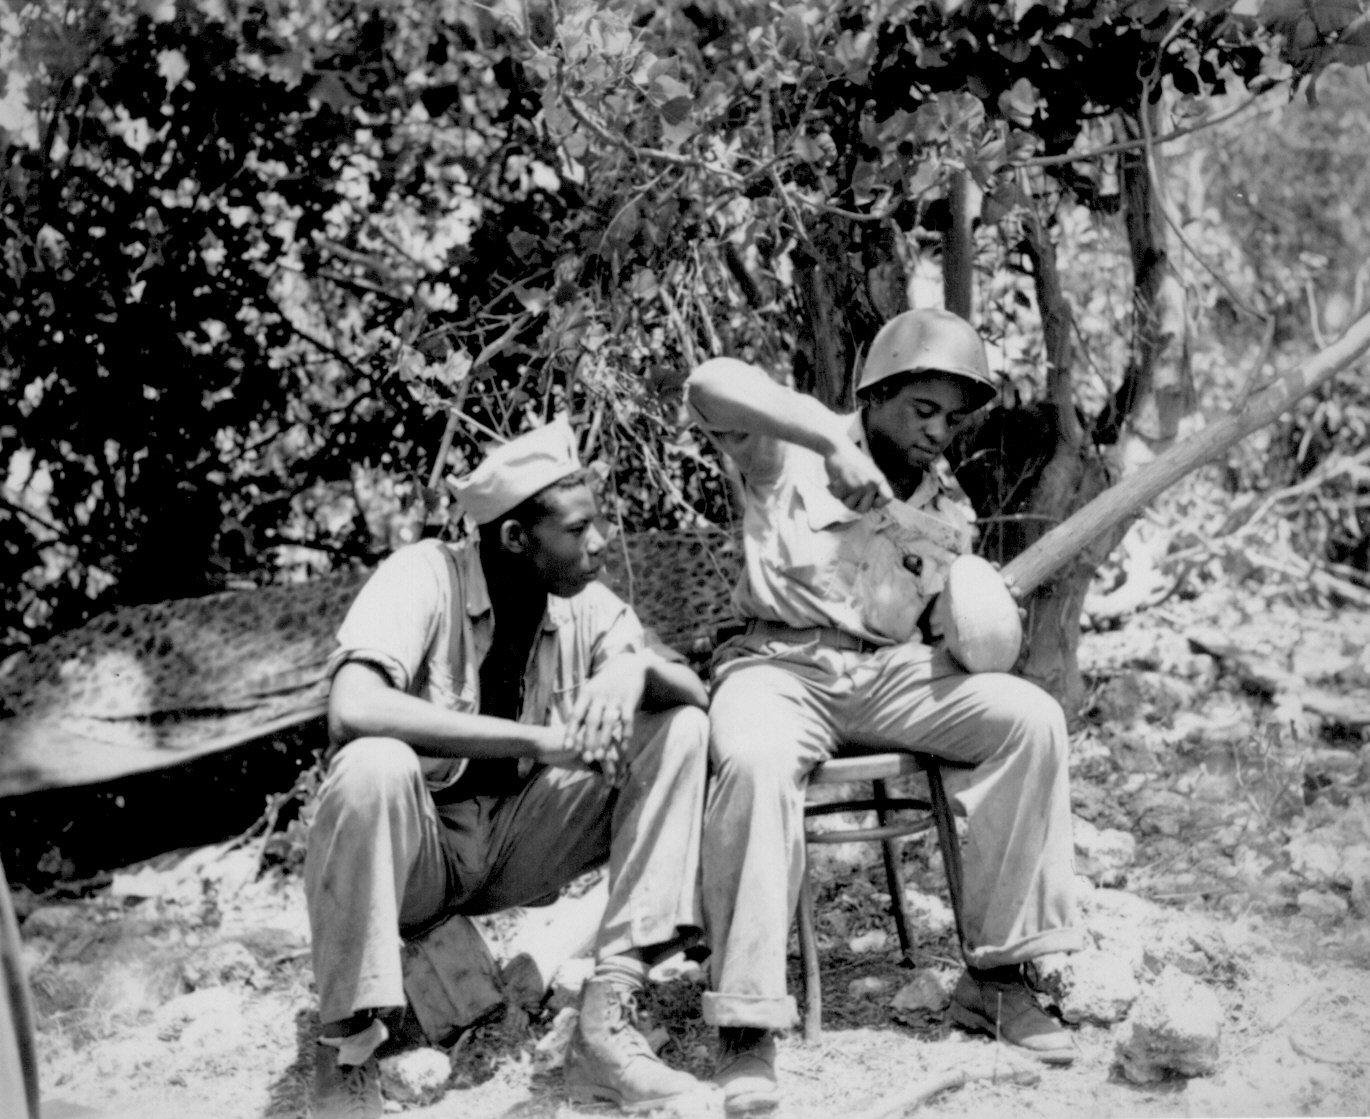 African-American US Marines Sergeant F. Smit and Corporal S. Brown opening a coconut, Saipan, Mariana Islands, Jun 1944